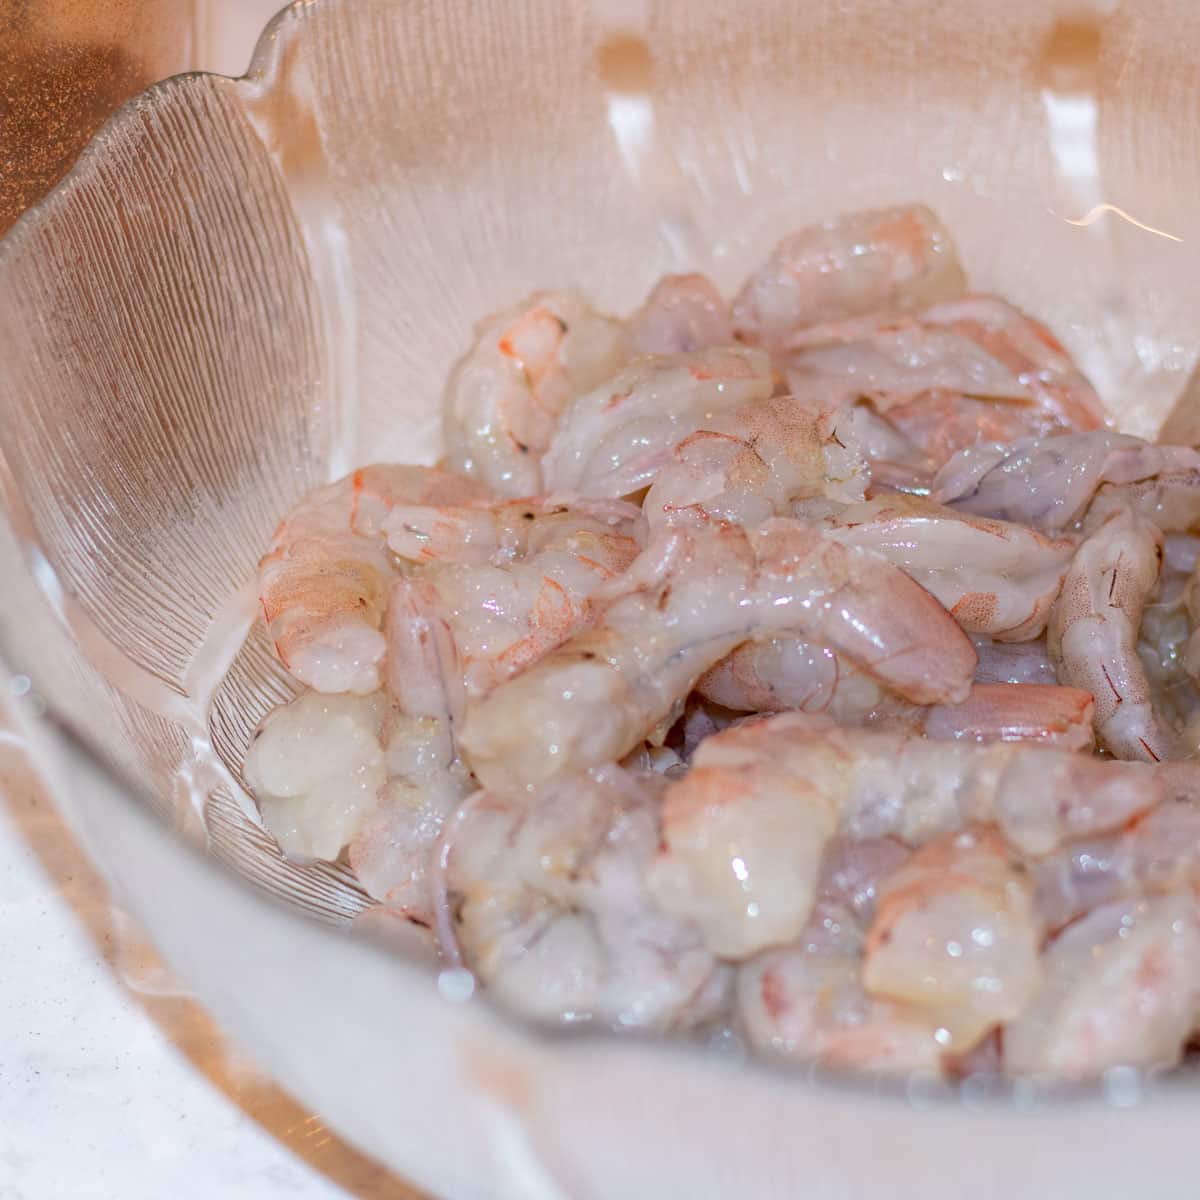 peeled shrimp in a glass bowl